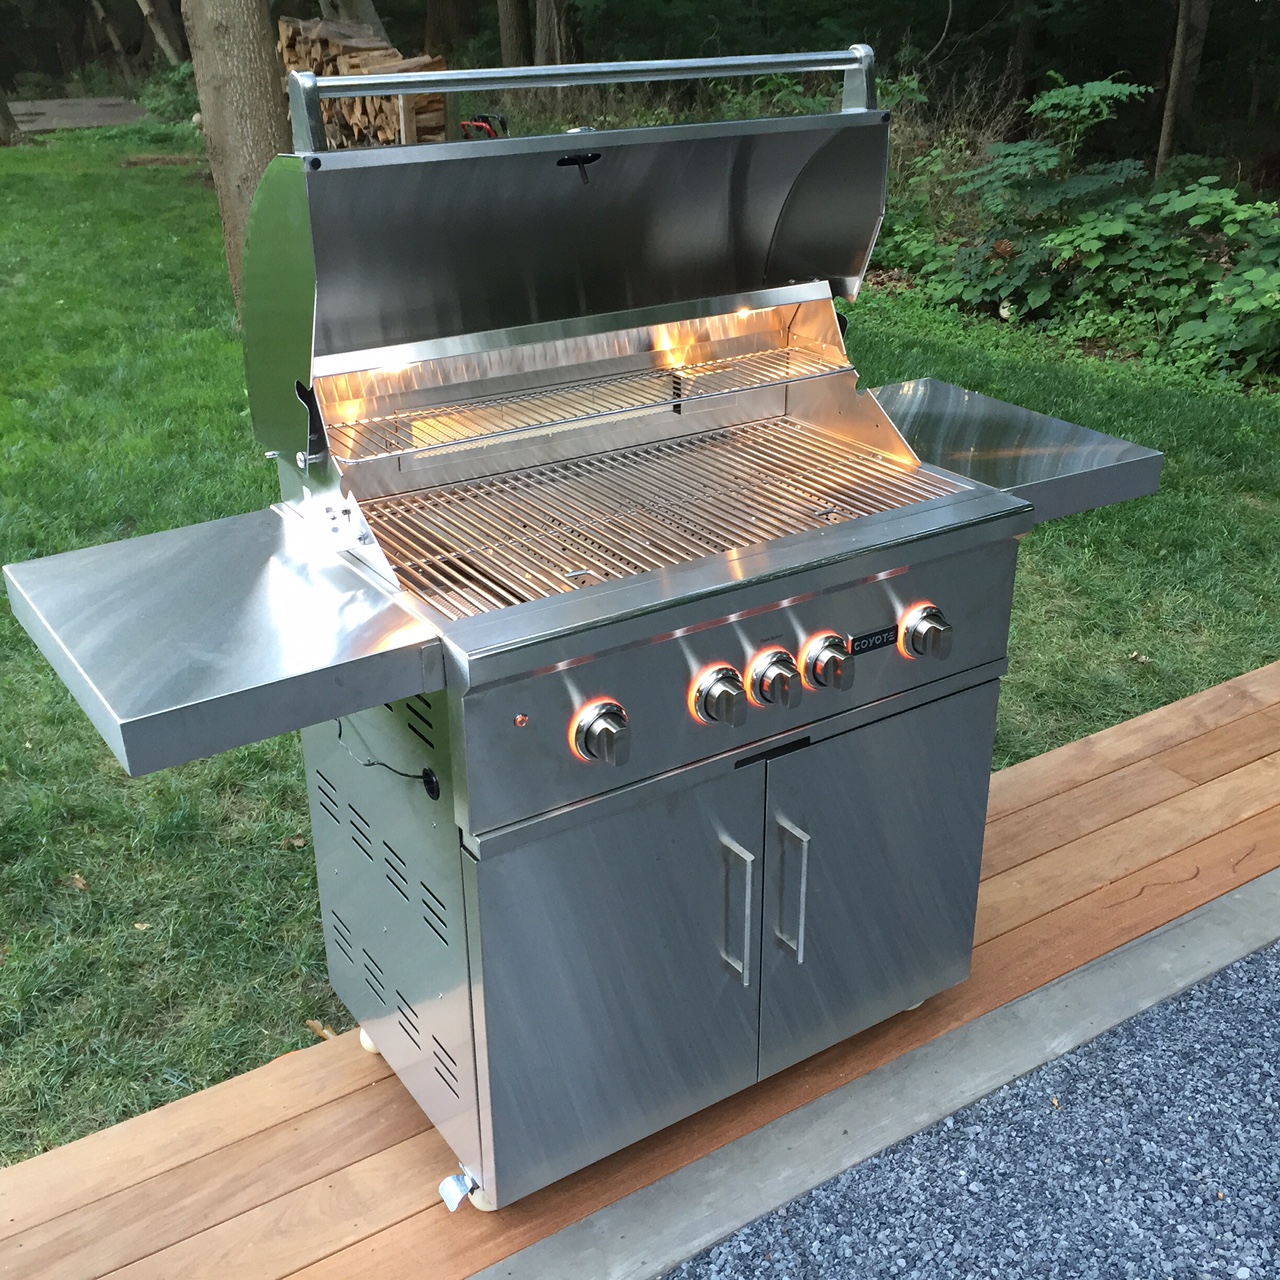 Unboxing Coyote Grill for Outdoor Kitchen - Jon Peters Art & Home1280 x 1280